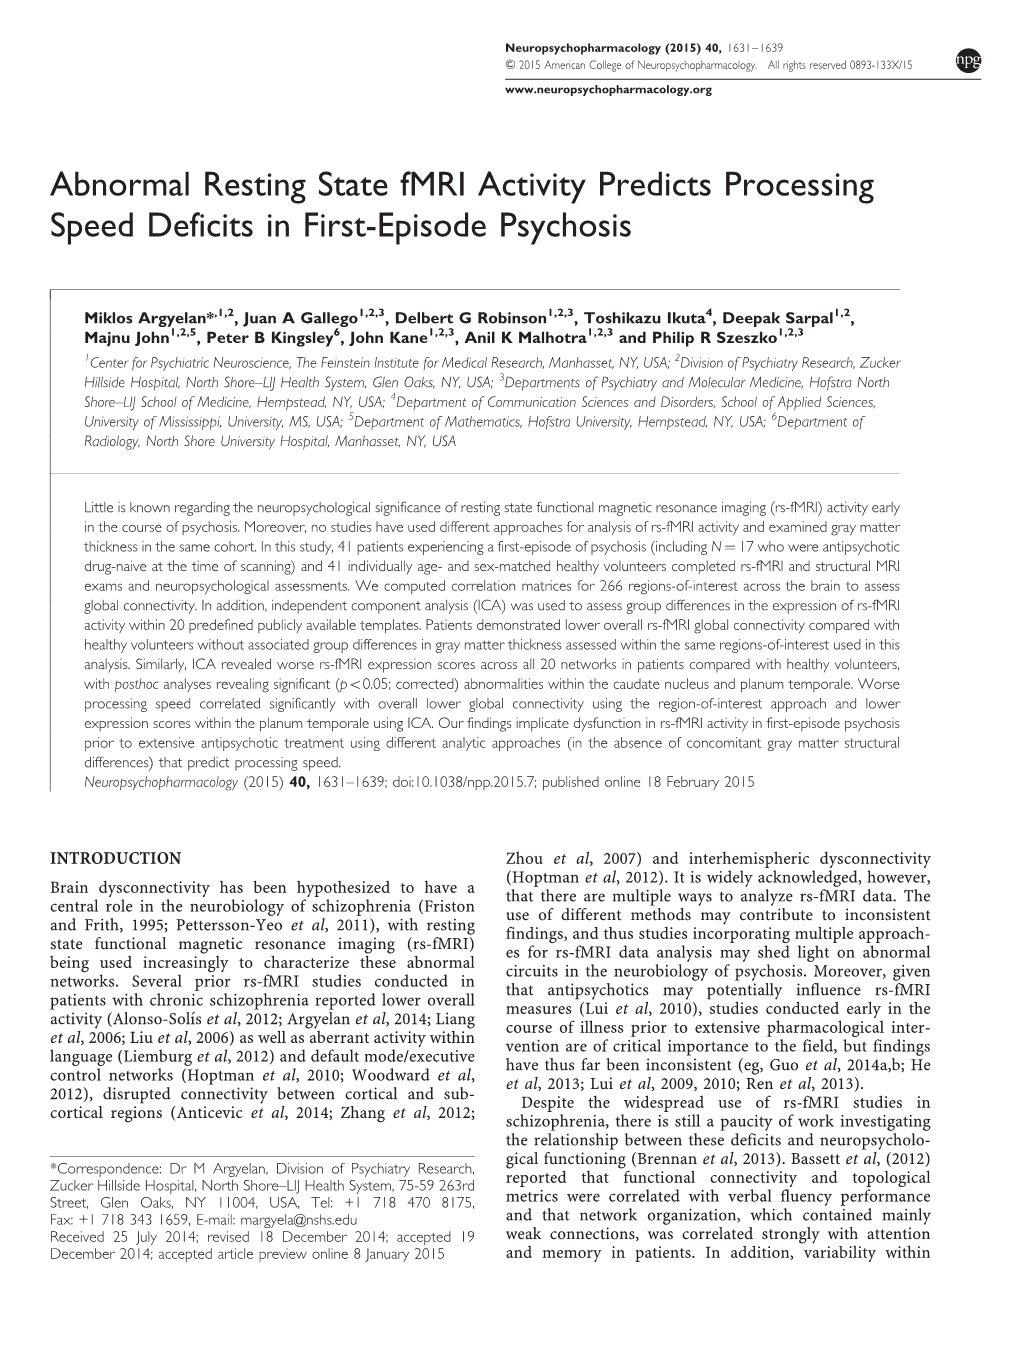 Abnormal Resting State Fmri Activity Predicts Processing Speed Deficits in First-Episode Psychosis